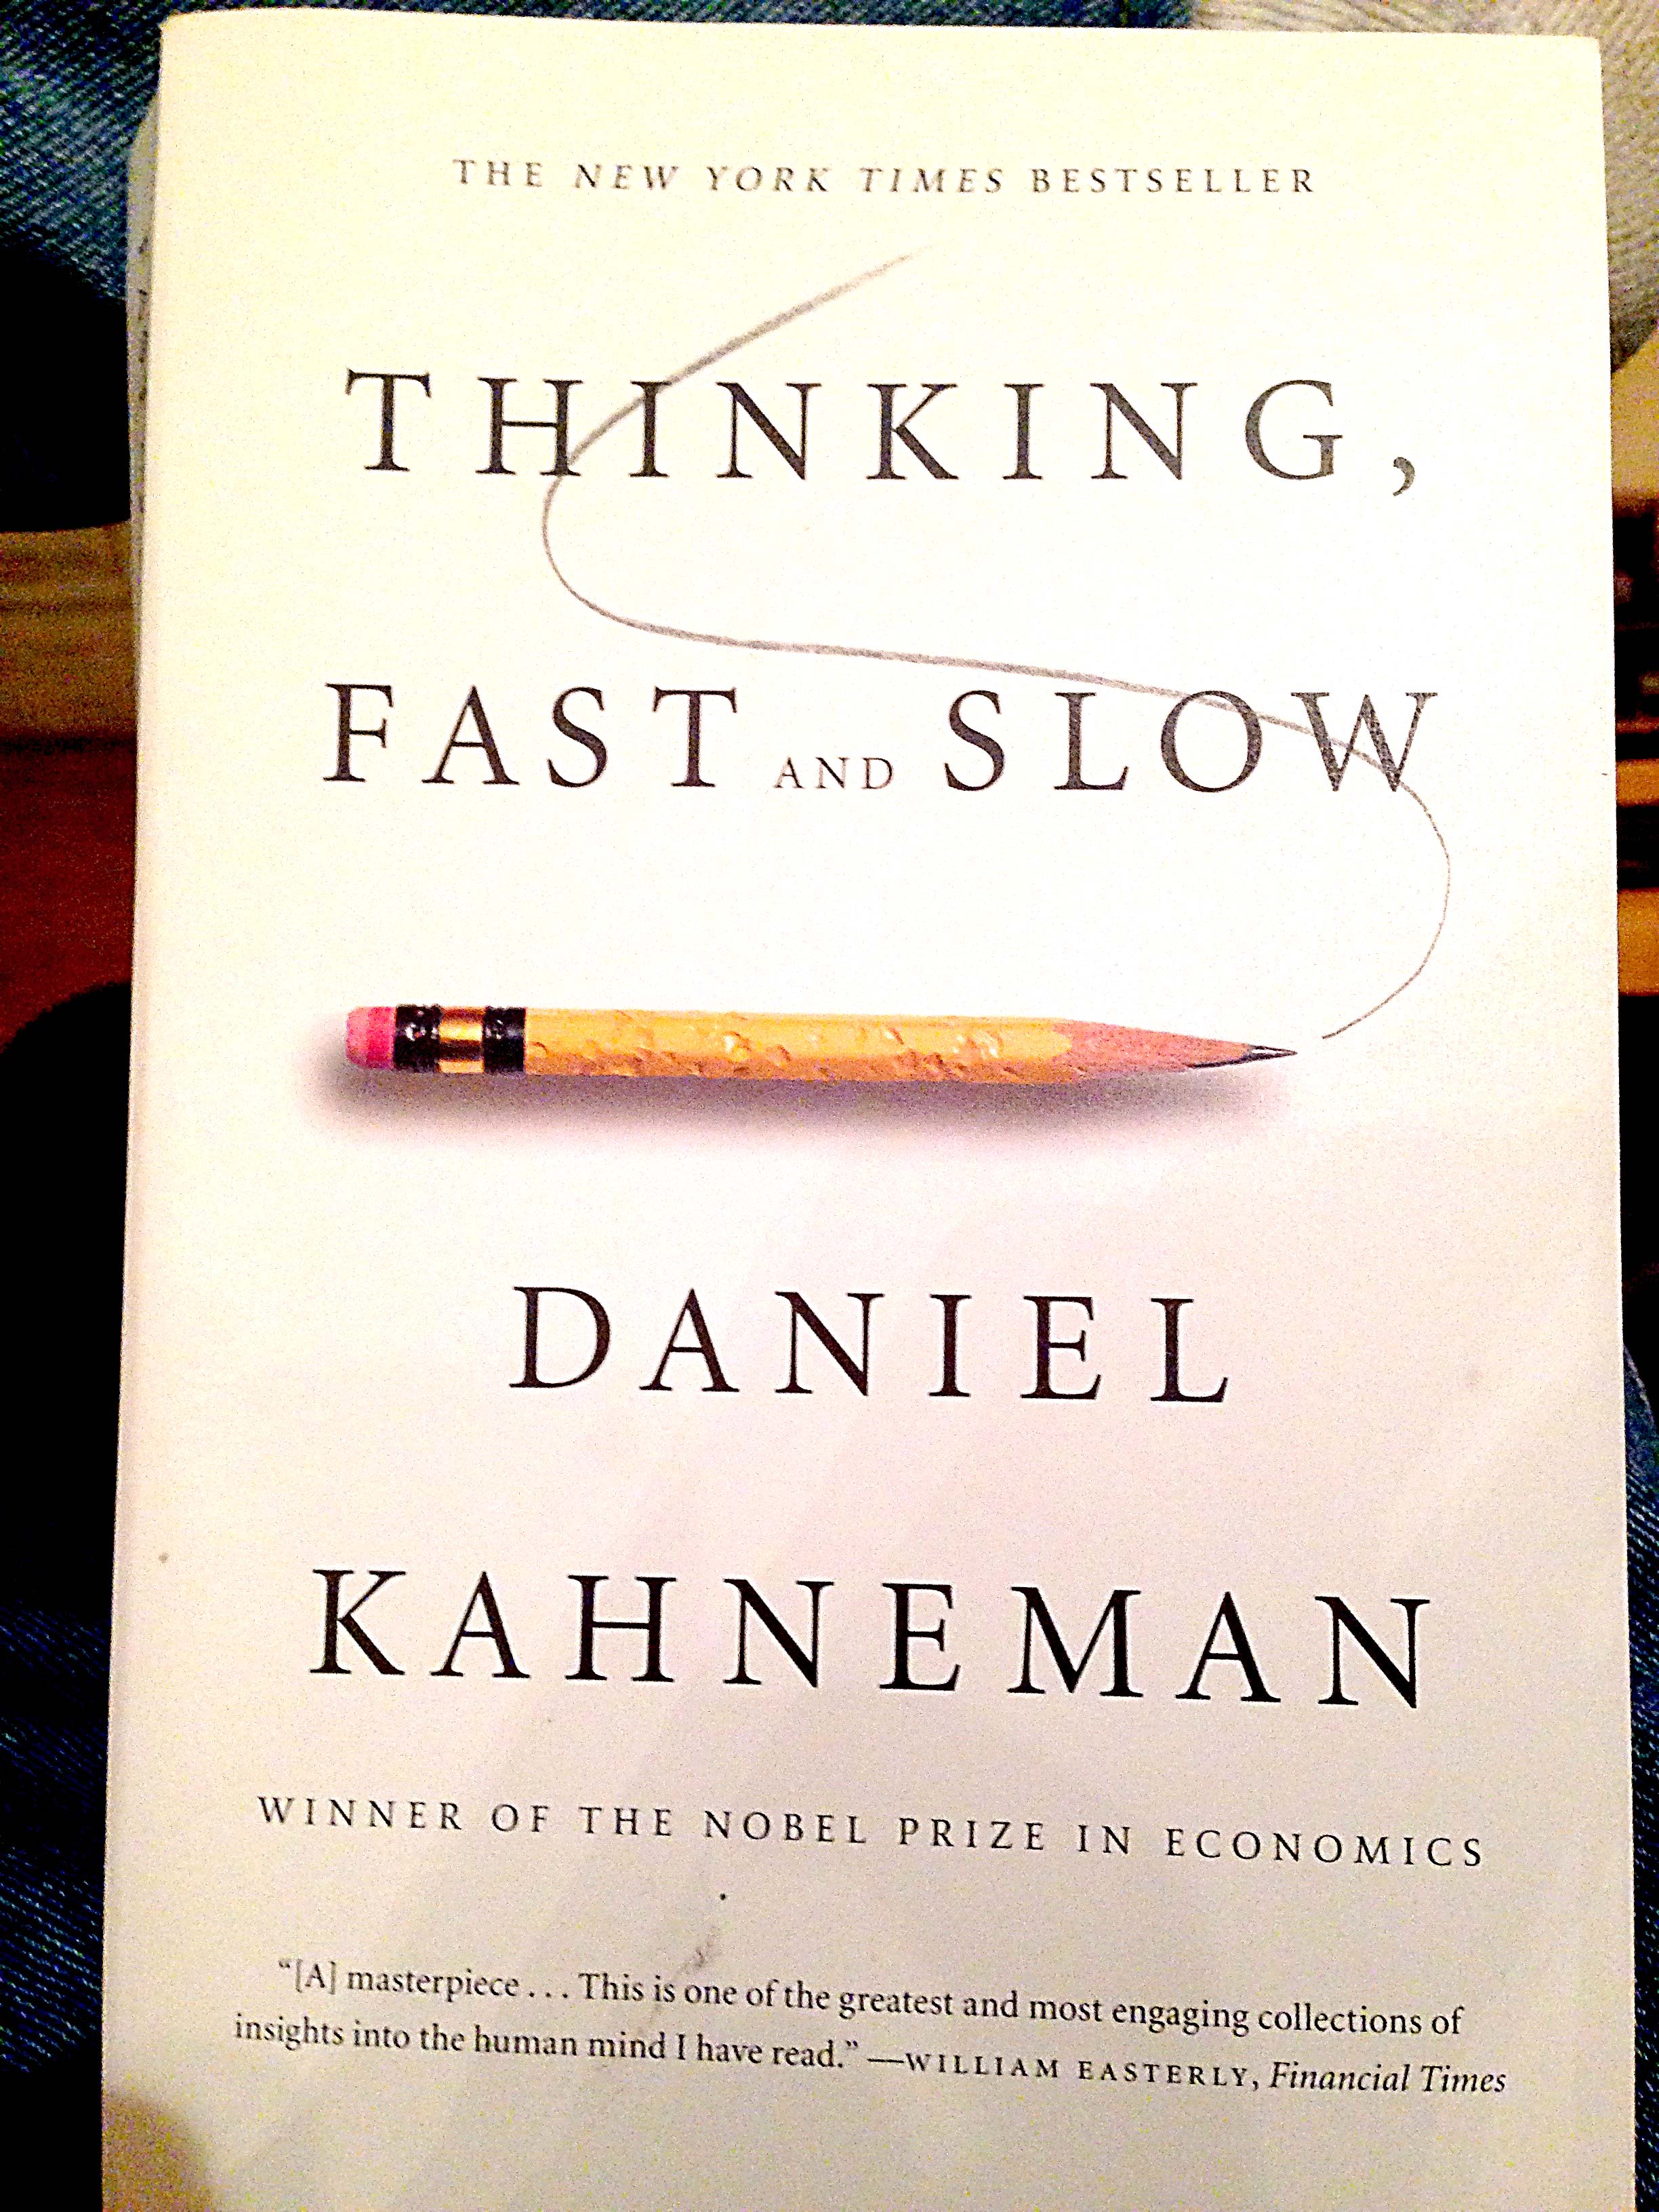 Thinking, Fast and Slow Summary of Key Ideas and Review